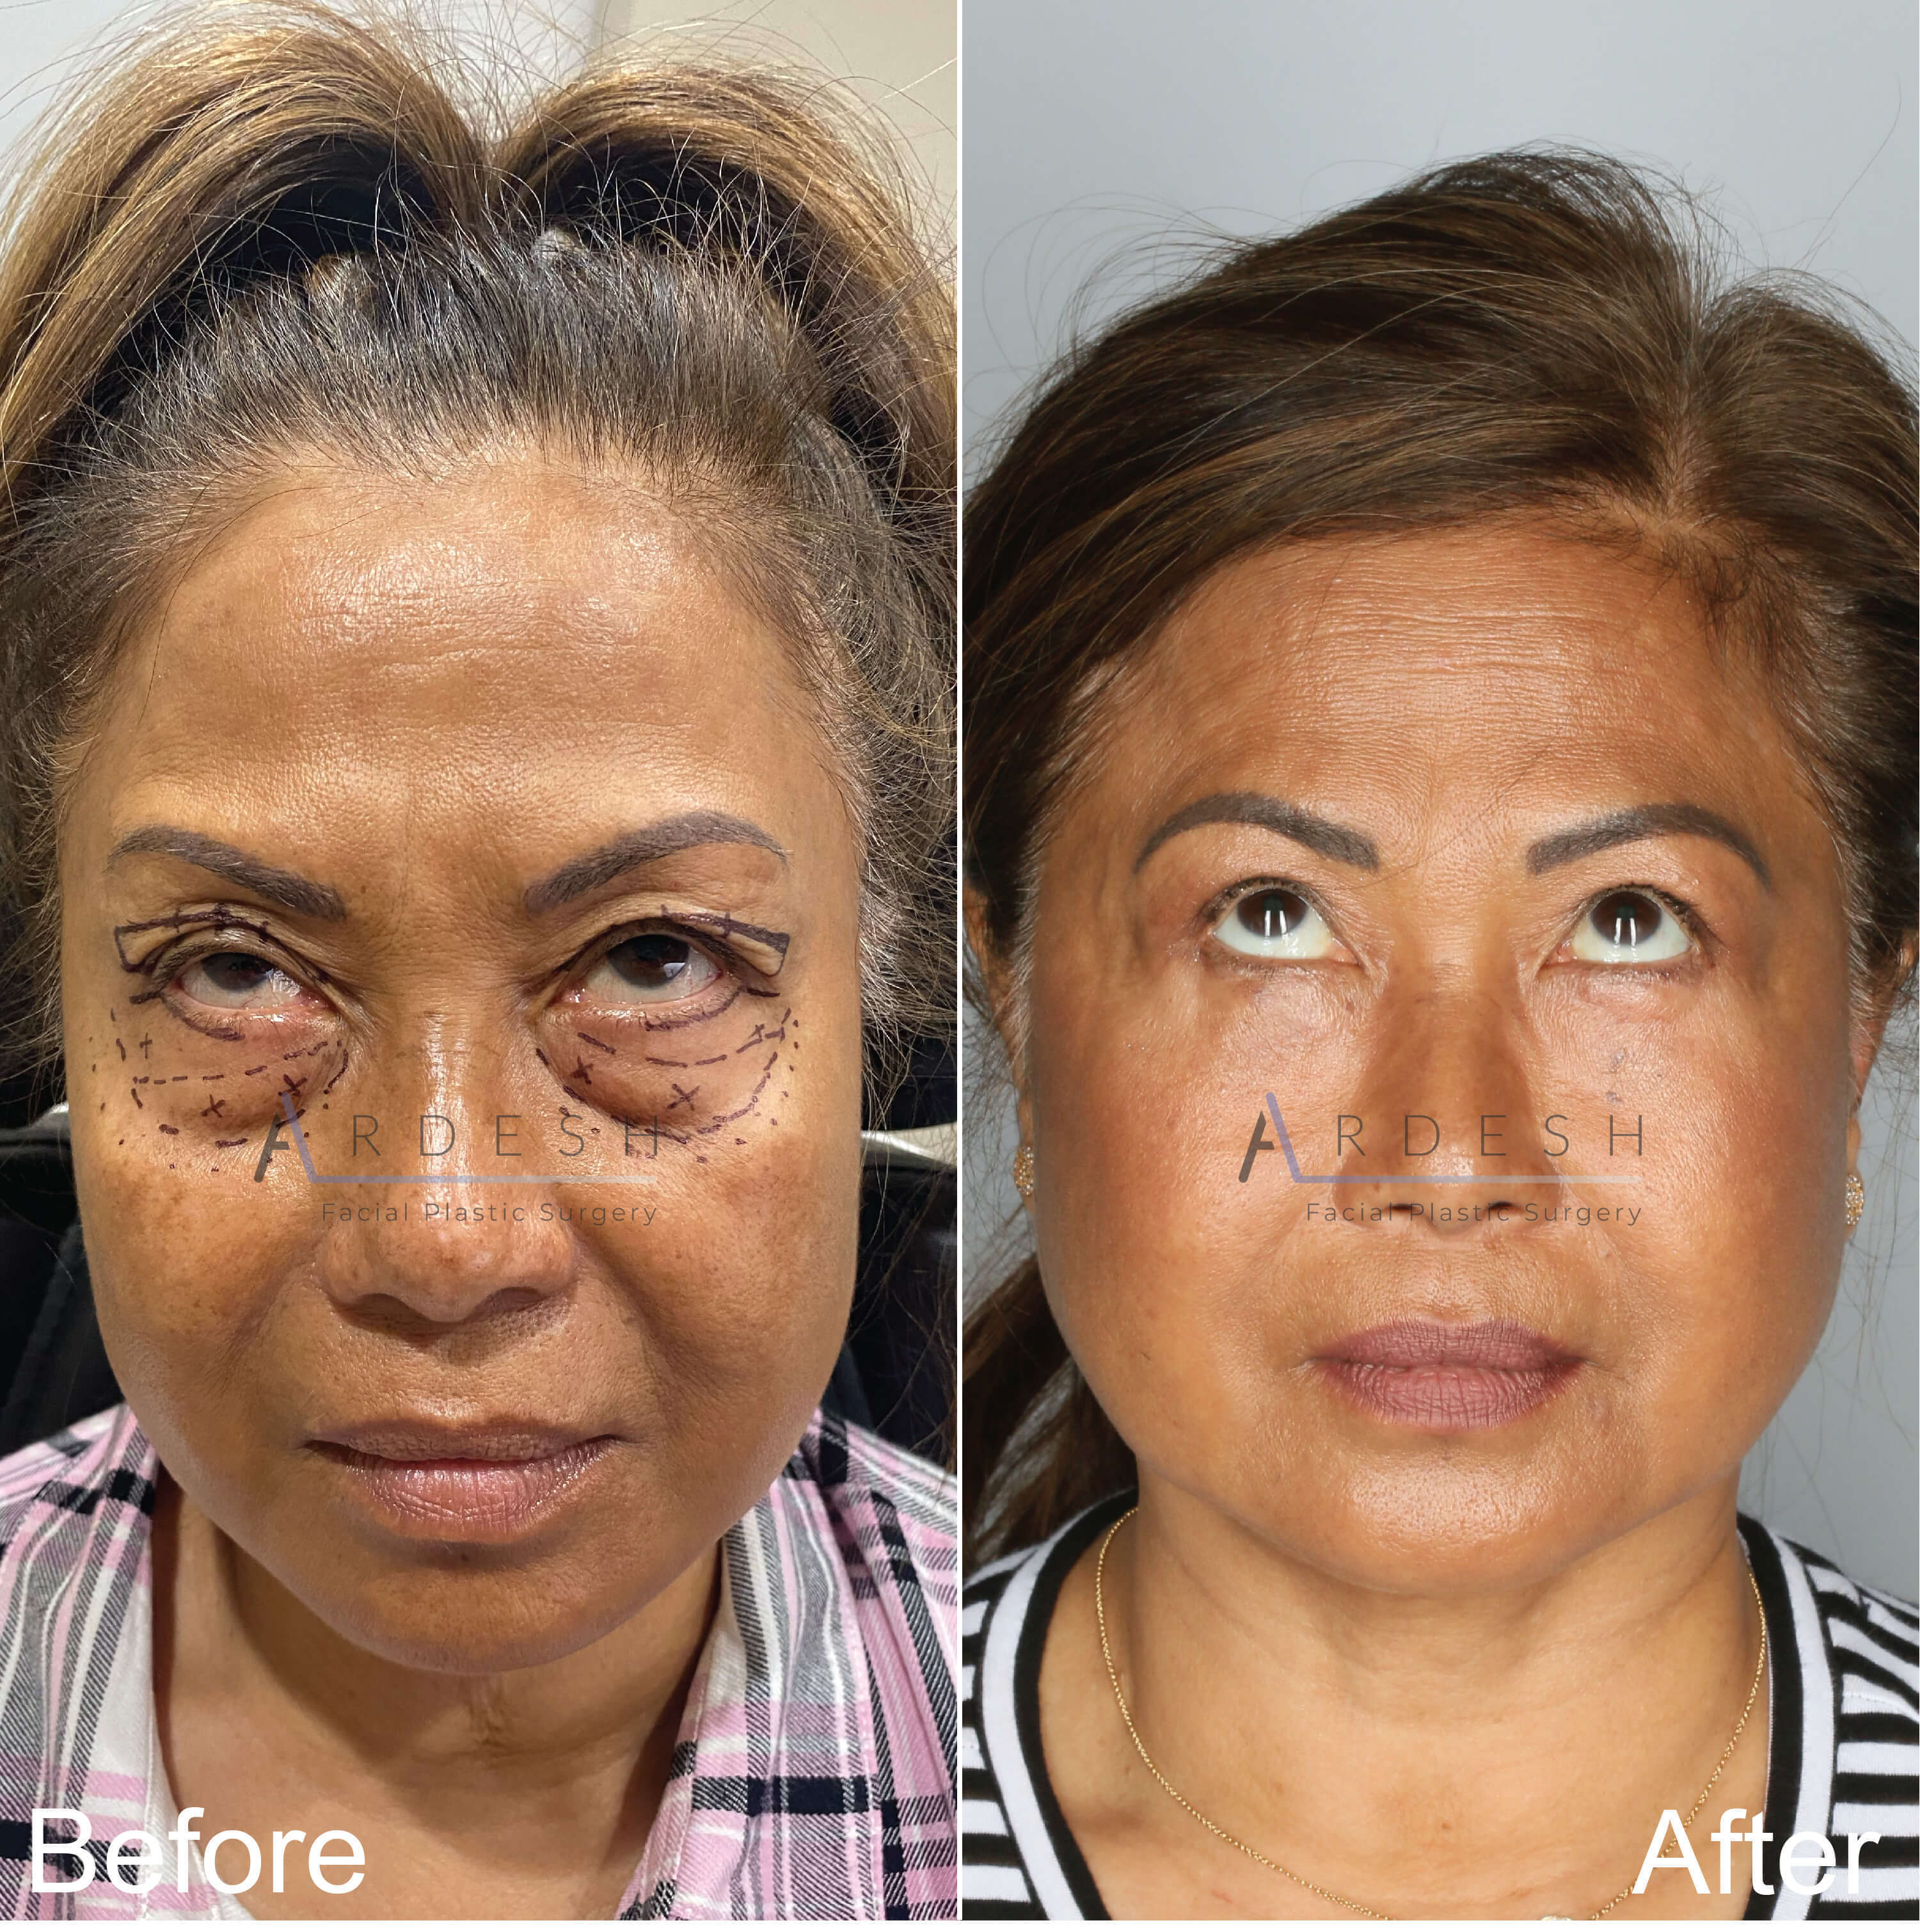 Eyelid Surgery Before and After | Ardesh Facial Plastic Surgery